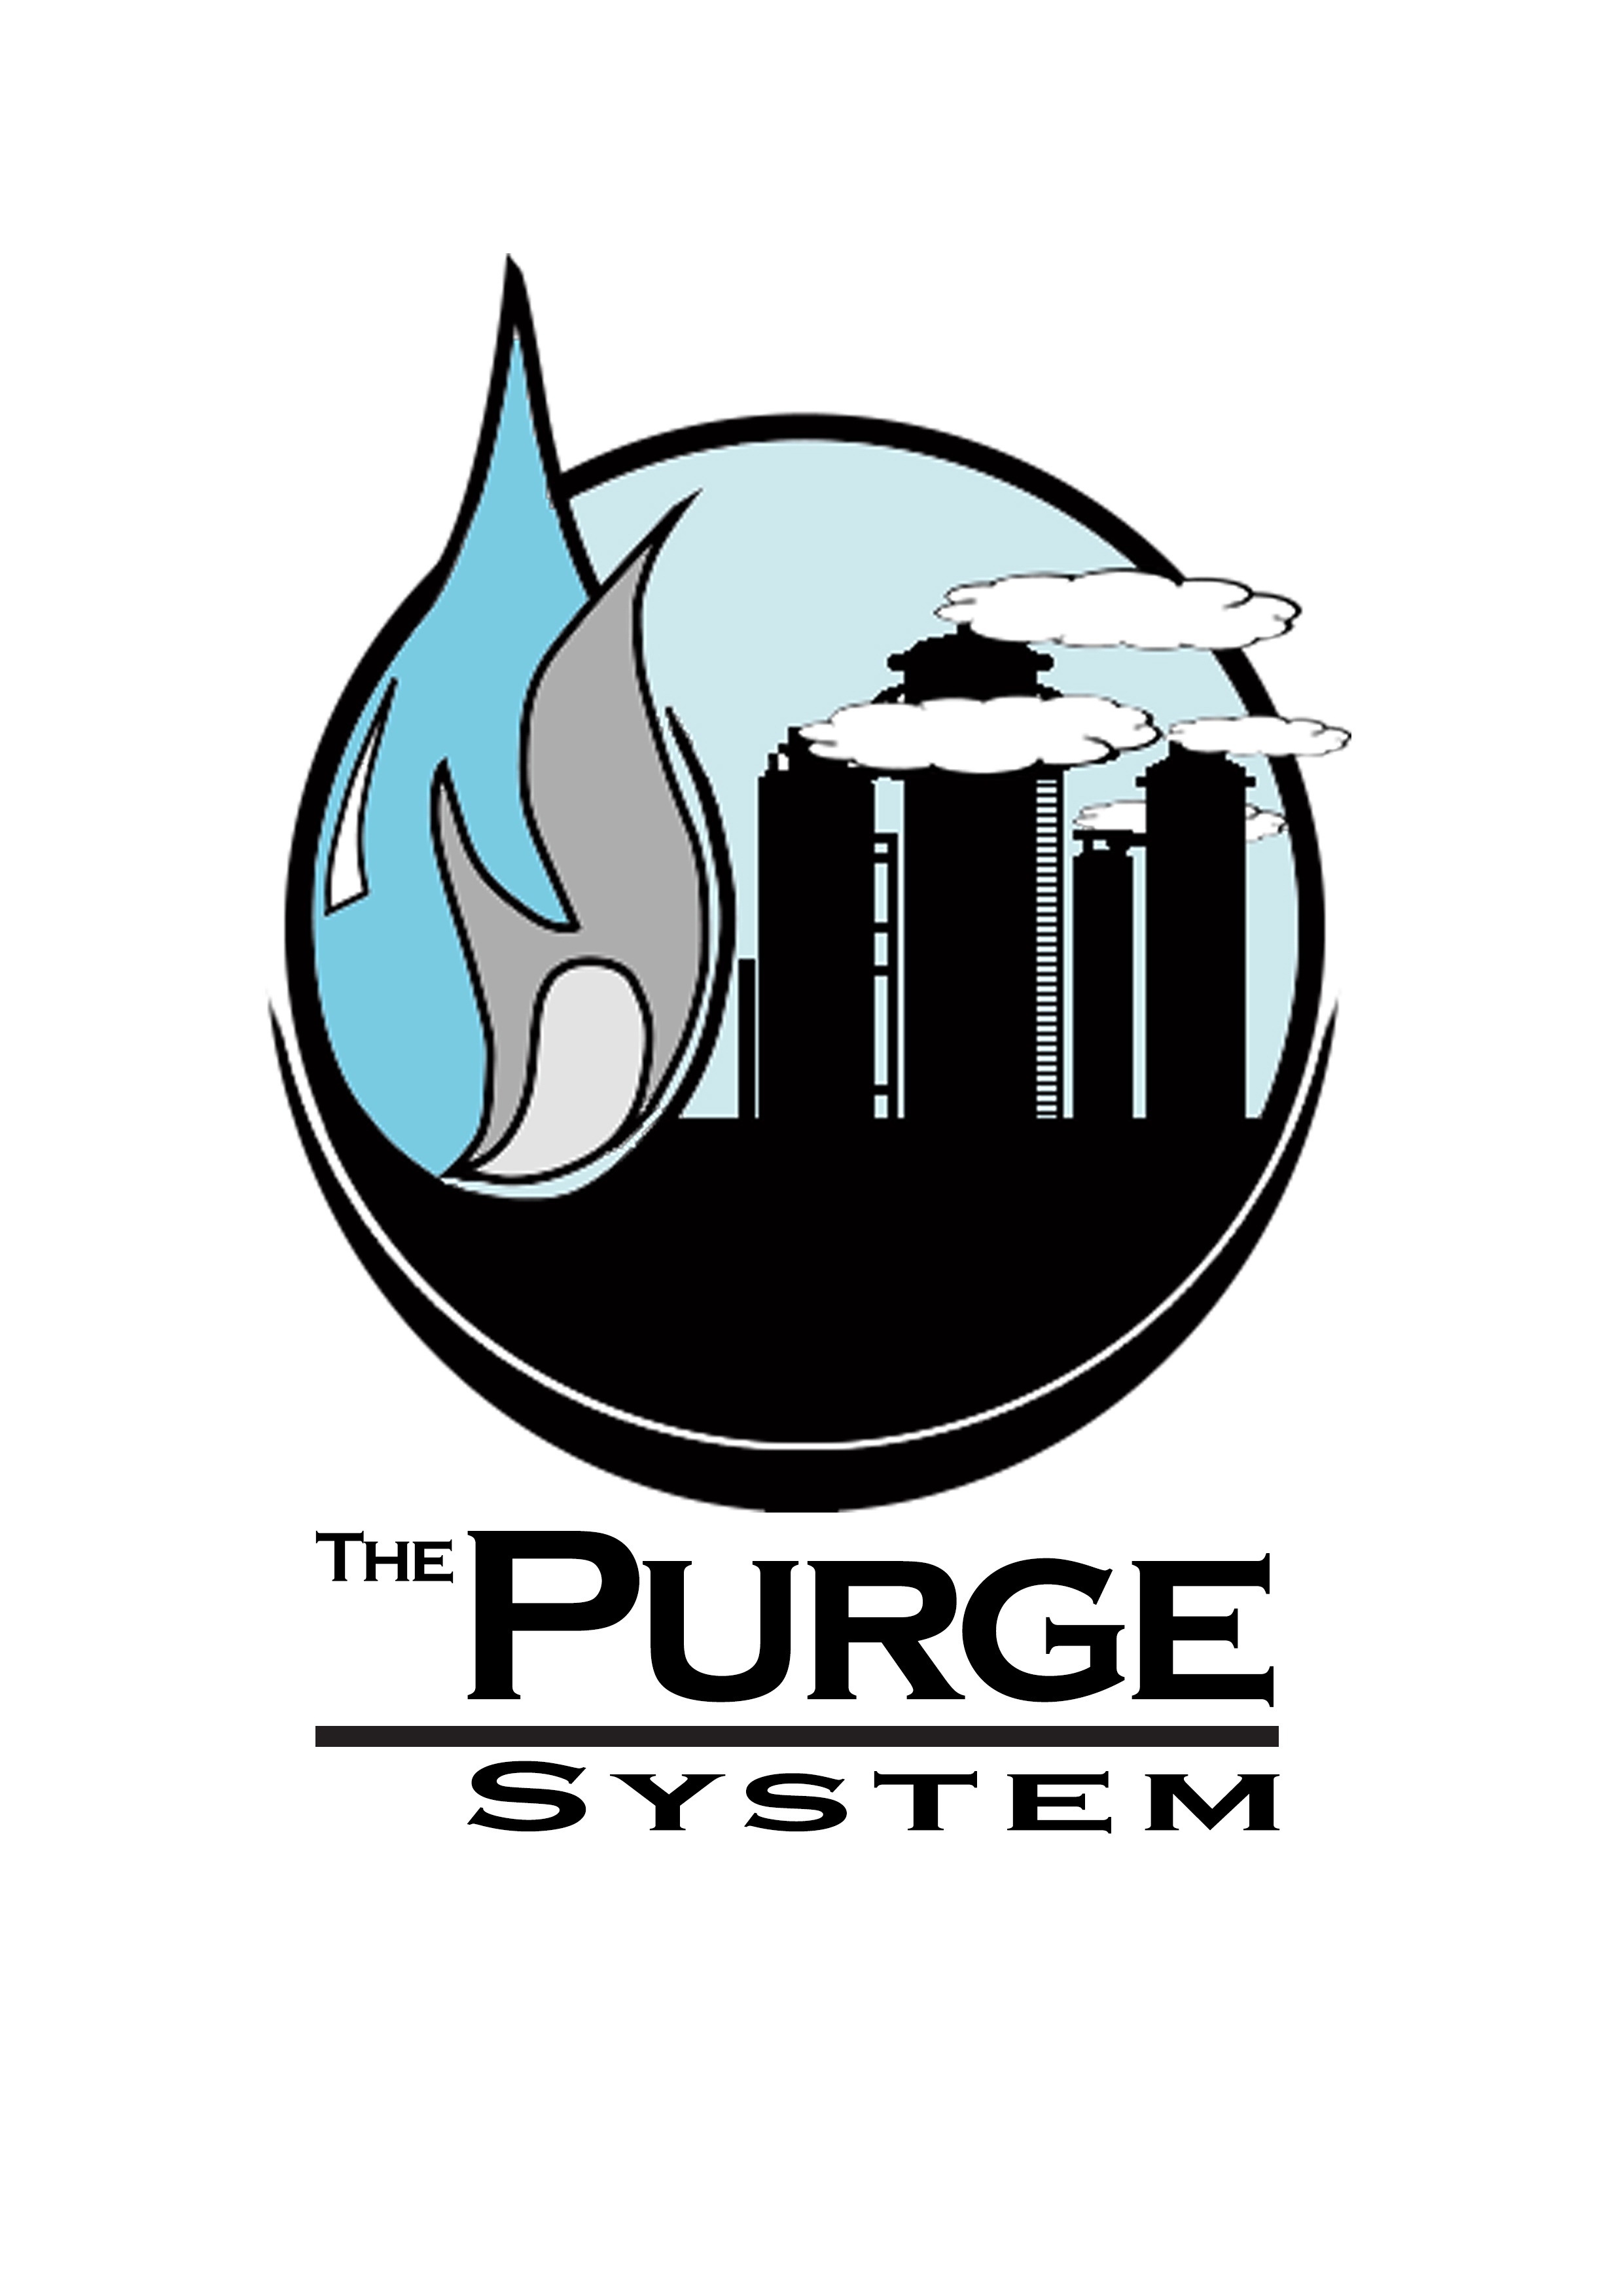 The Purge System will prevent toxic chemicals from spreading to people and wildlife, helping people stay safer and healthier for years to come.